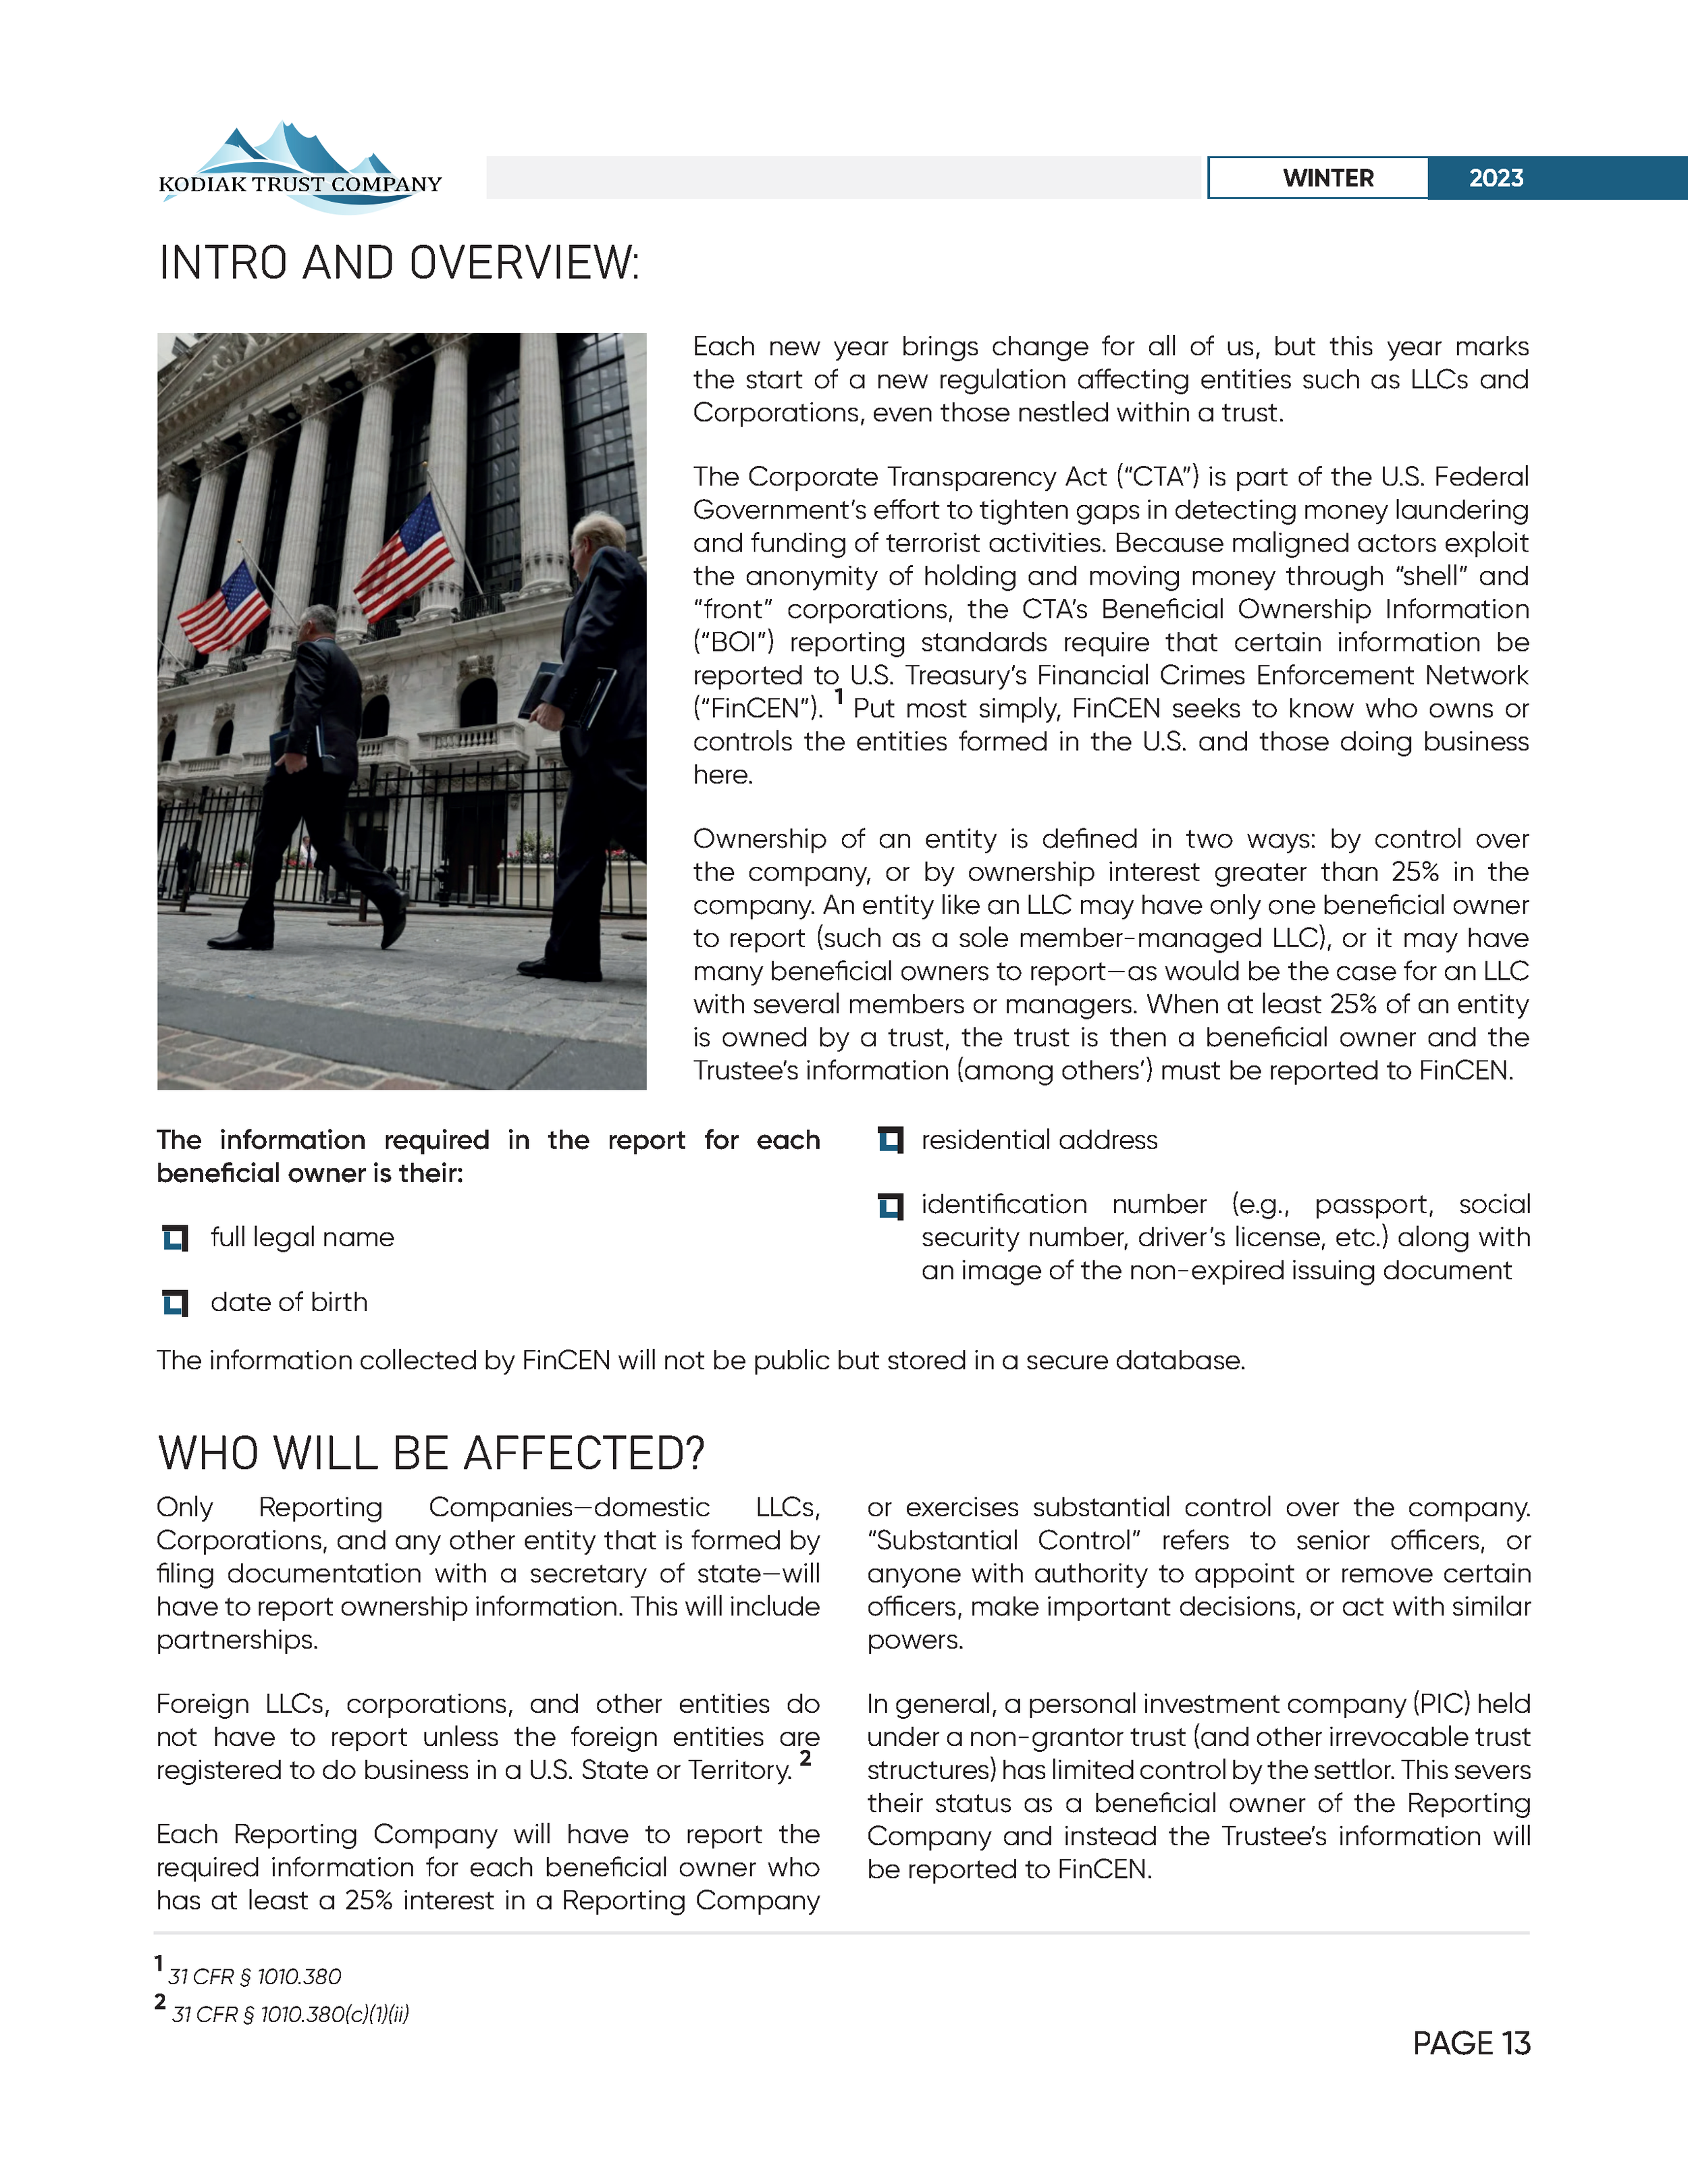 KTC QUARTERLY NEWSLETTER WINTER 2023_Page13.png